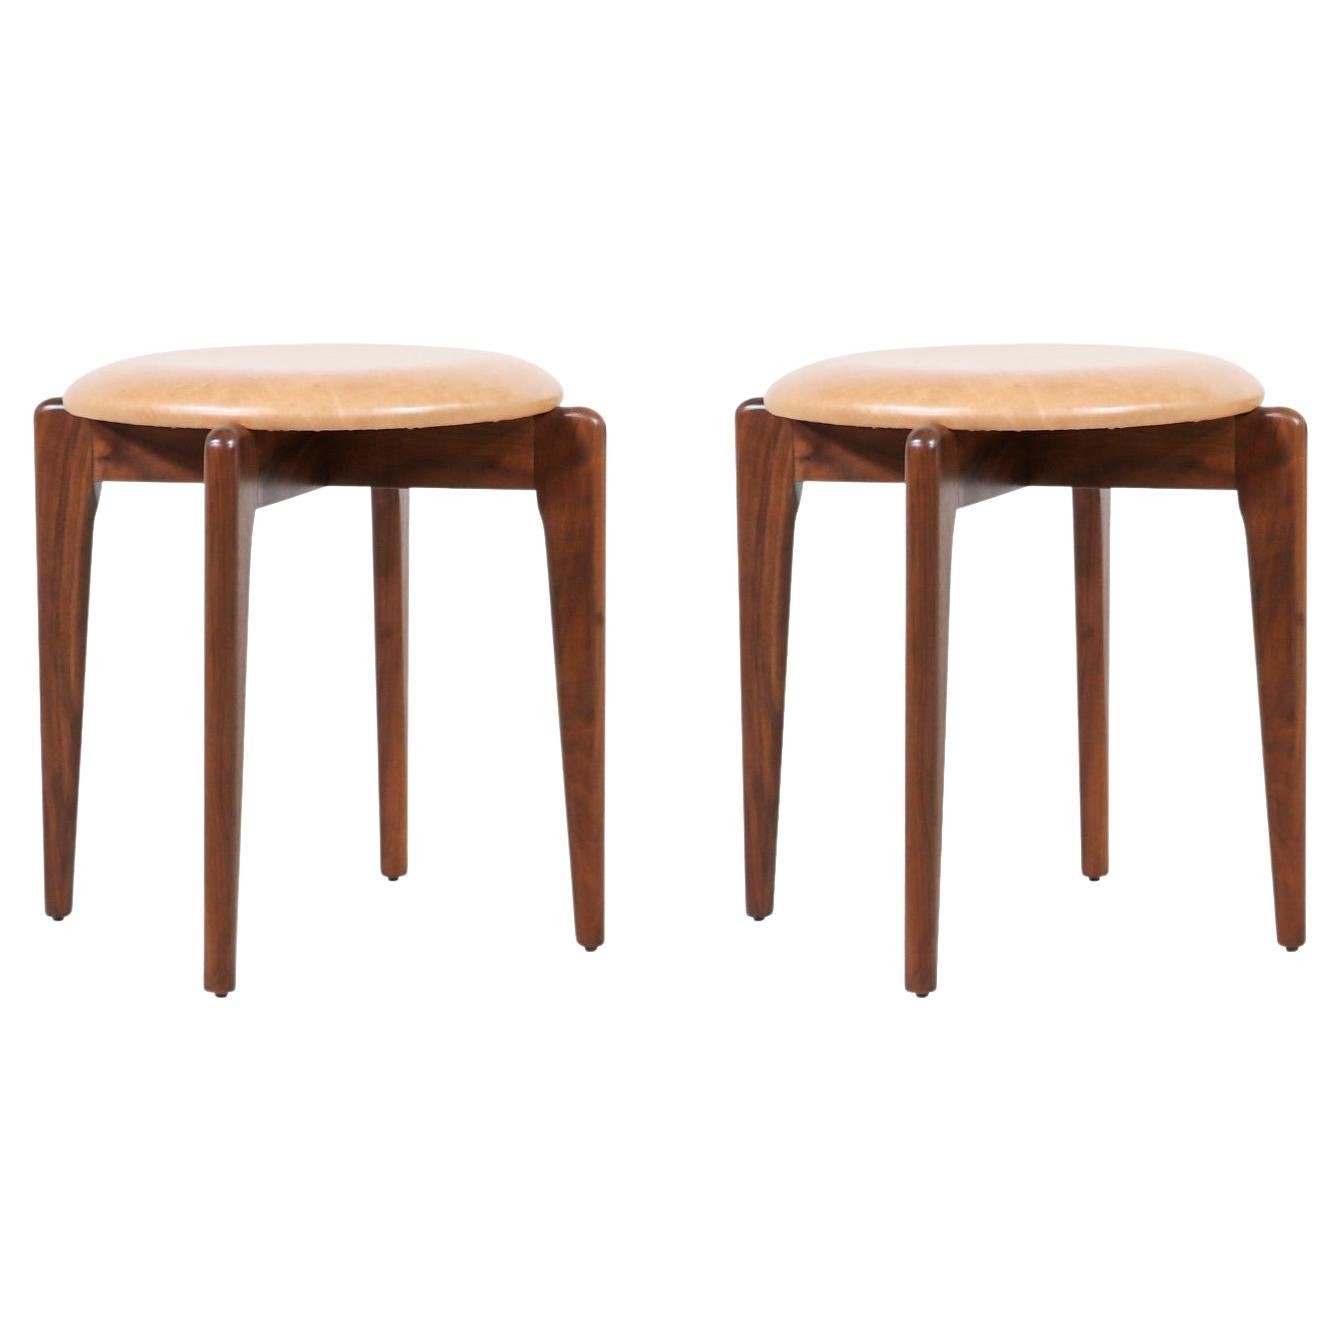 Adrian Pearsall Sculpted Walnut & Leather Stools for Craft Associates